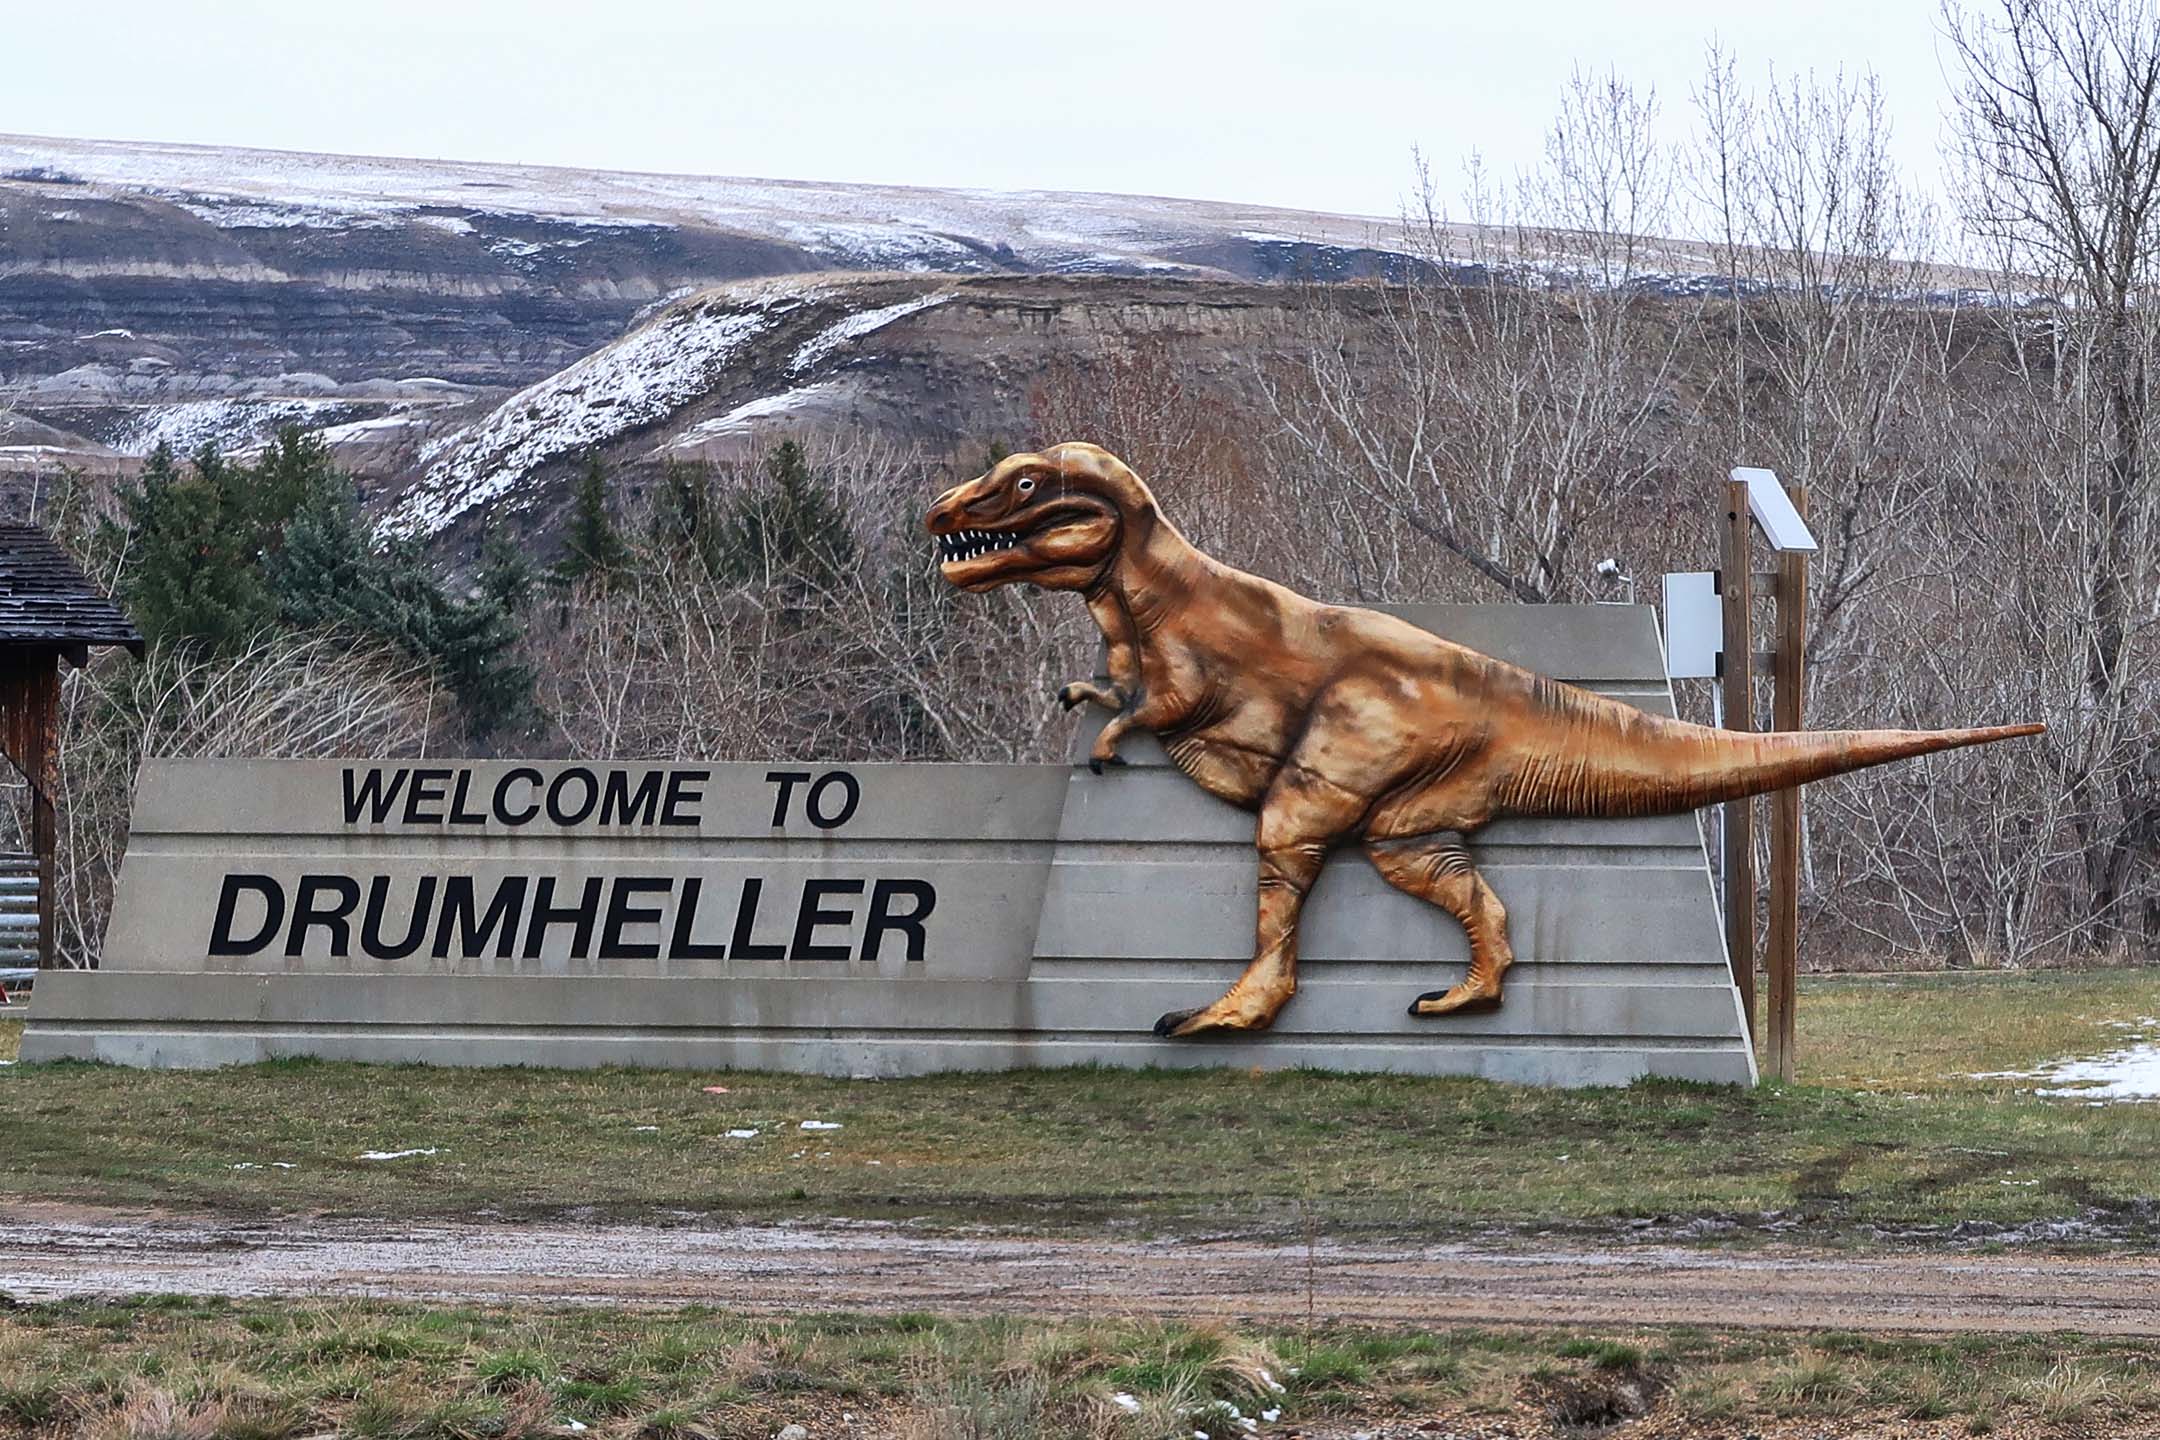 Drumheller is famous for its dinosaurs